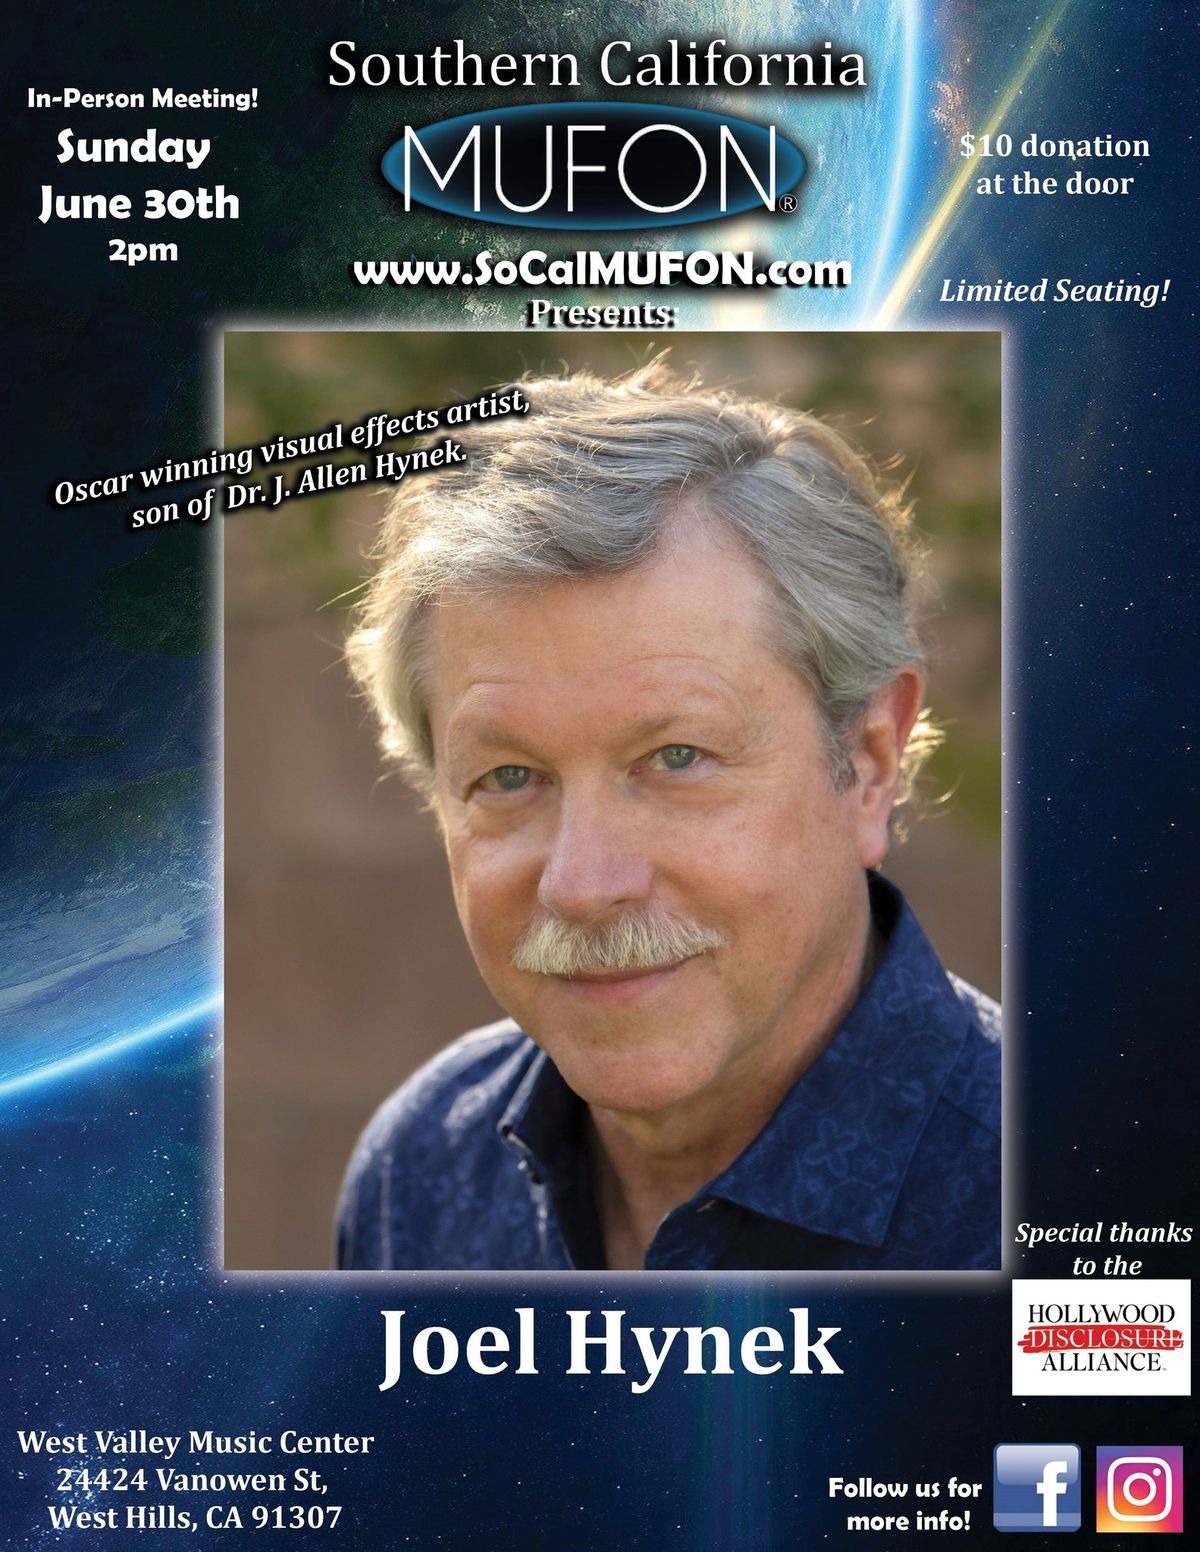 Southern CA MUFON In-Person Meeting with guest Joel Hynek